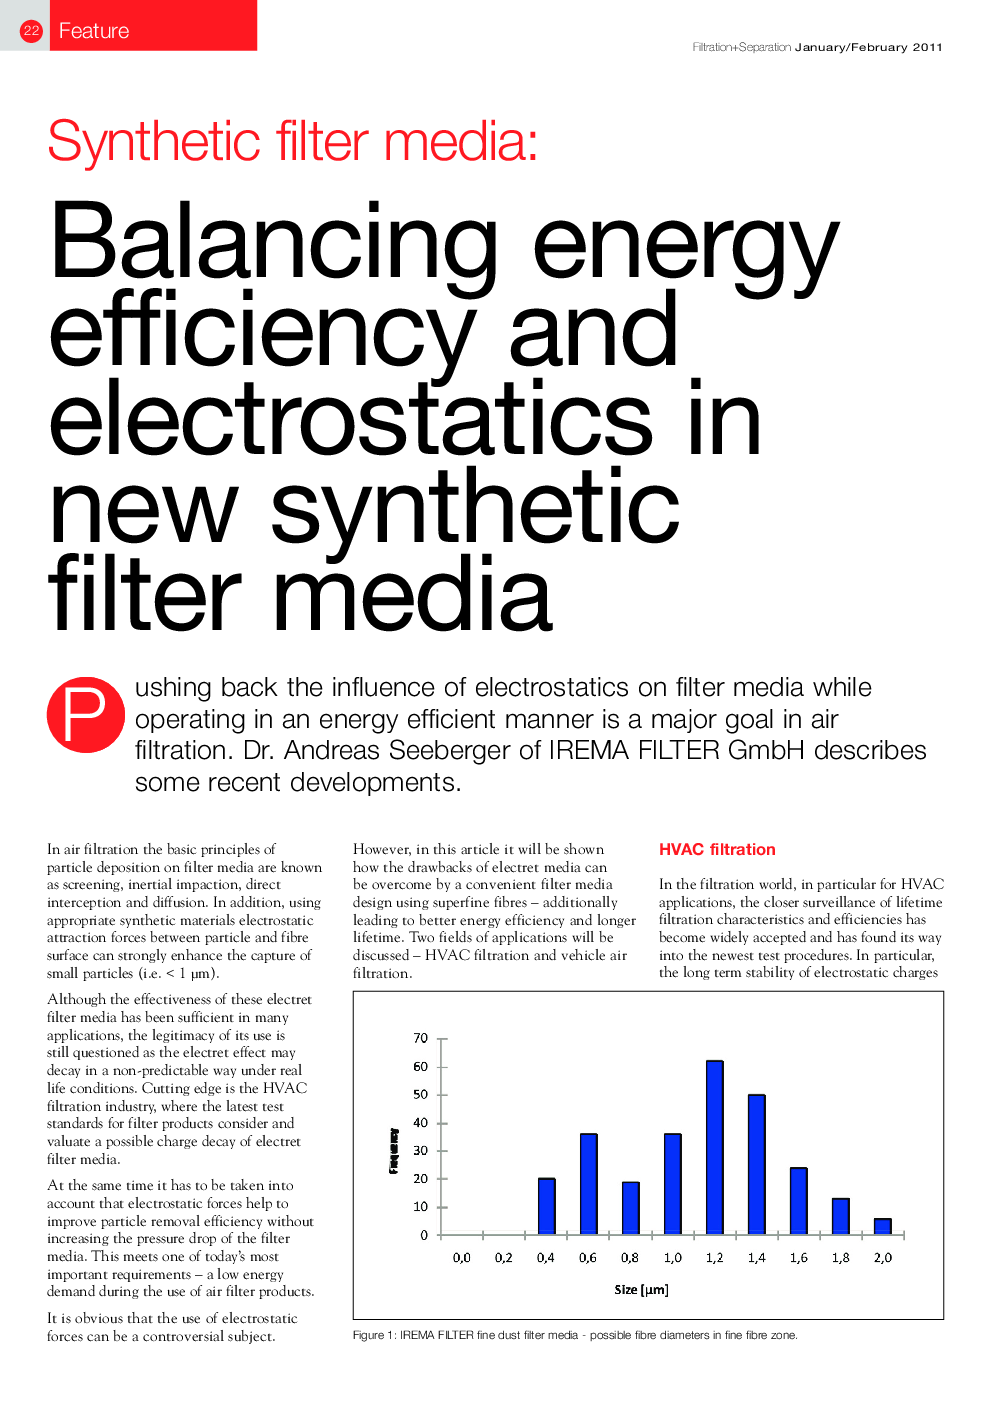 Synthetic filter media: Balancing energy efficiency and electrostatics in new synthetic filter media